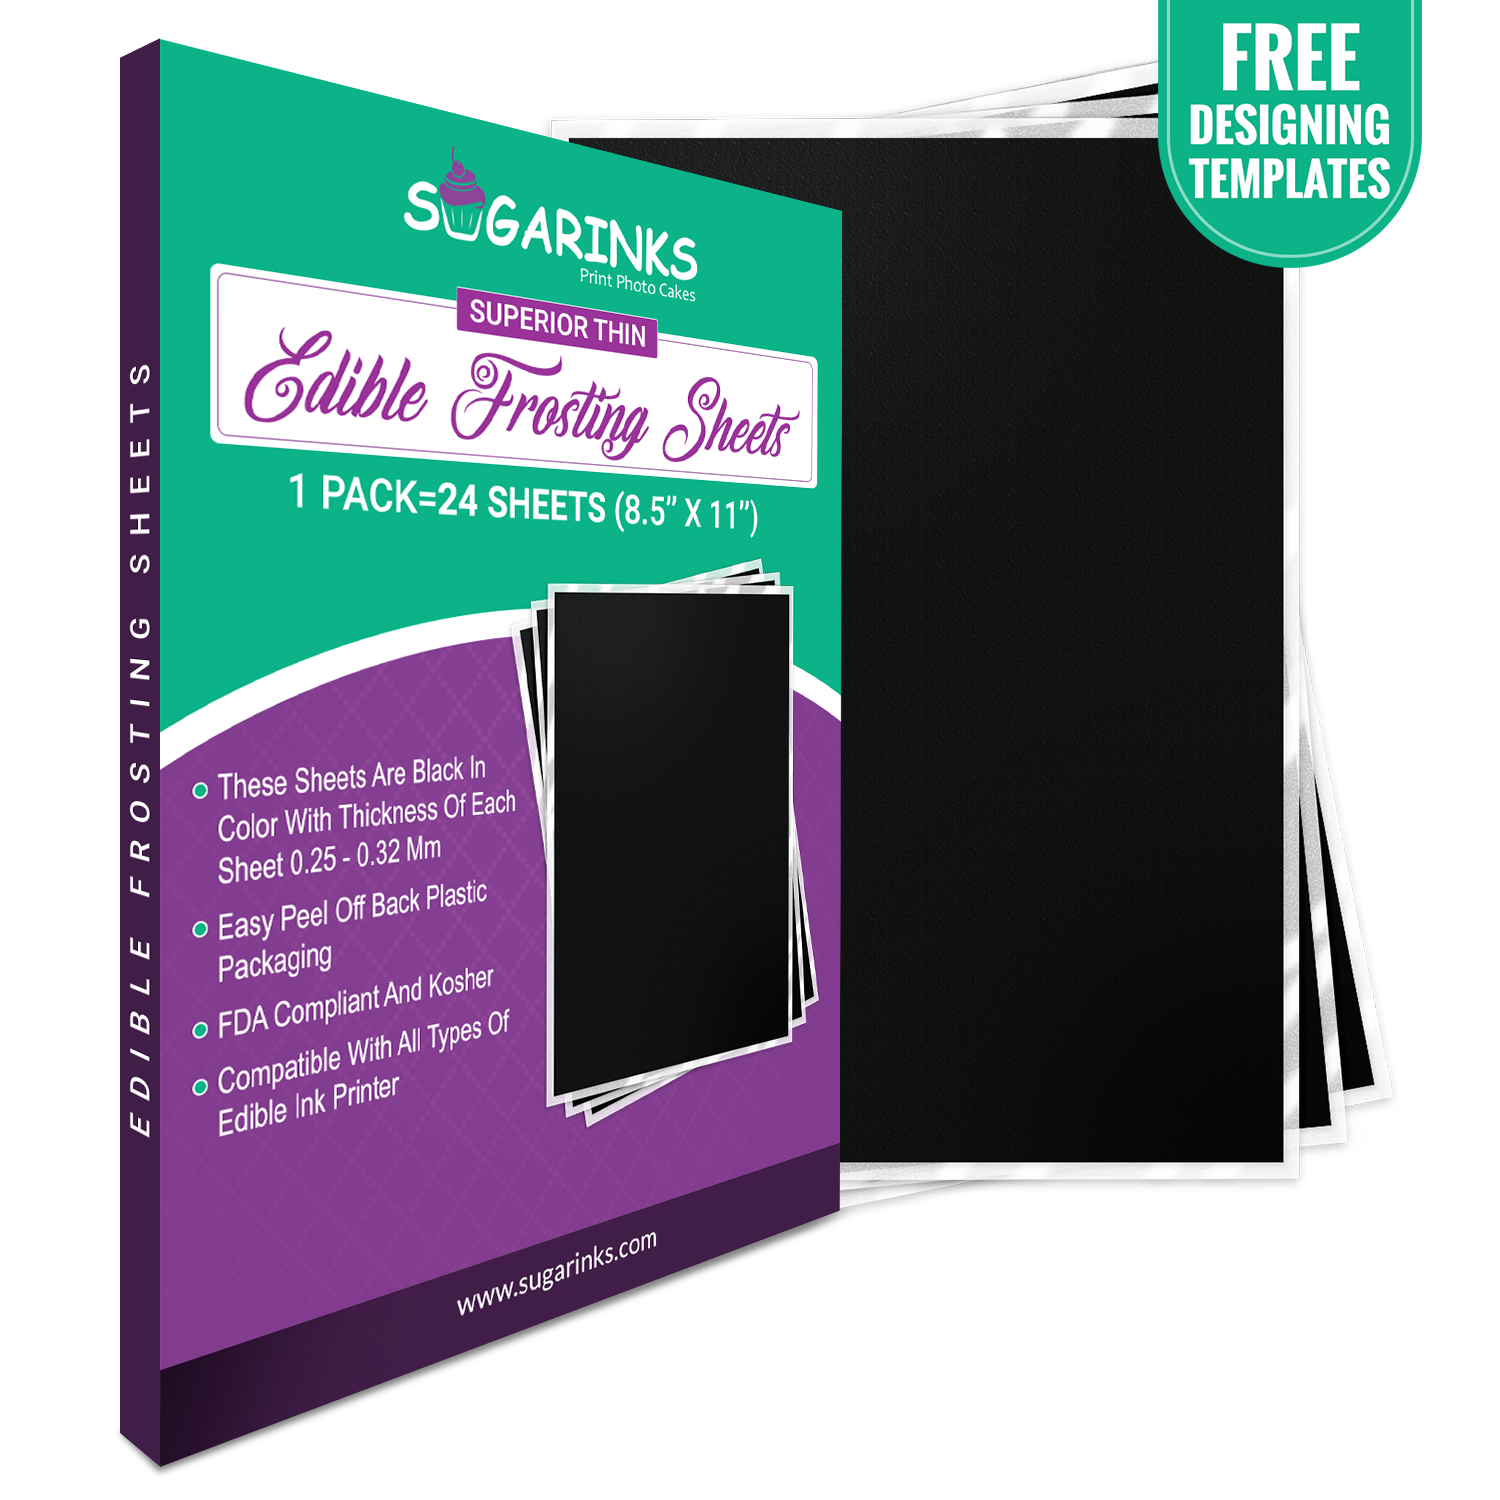 Icinginks Custom Edible Printing Service on Chocolate Transfer Sheets of  Size 11 inch X 7 inch – Get Your Favorite Picture Printed in Best Quality